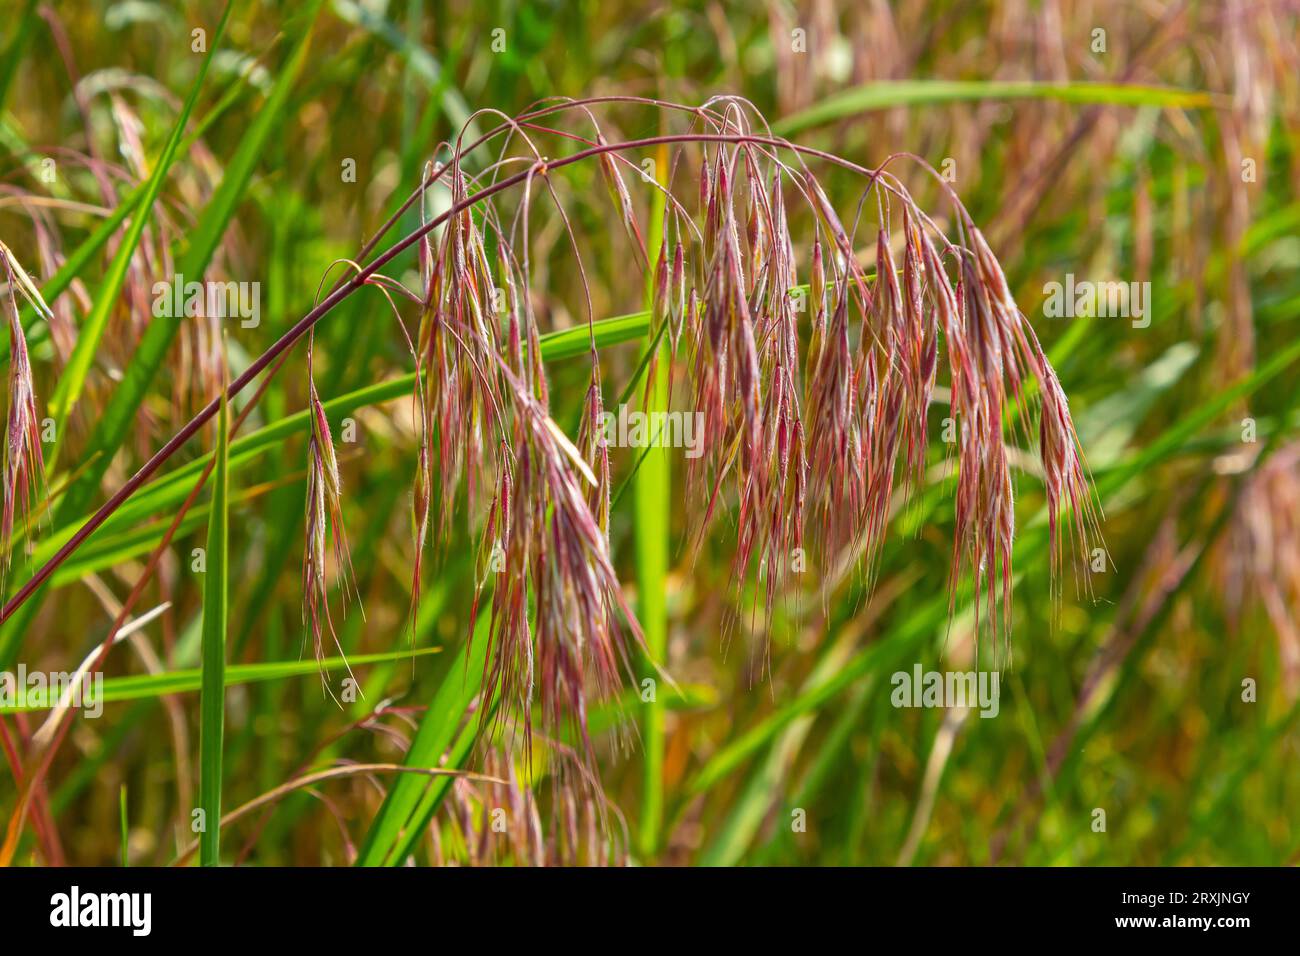 The plant Bromus sterilis, anysantha sterilis, or barren brome belongs to the Poaceae family at the time of flowering. wild cereal plant Bromus steril Stock Photo